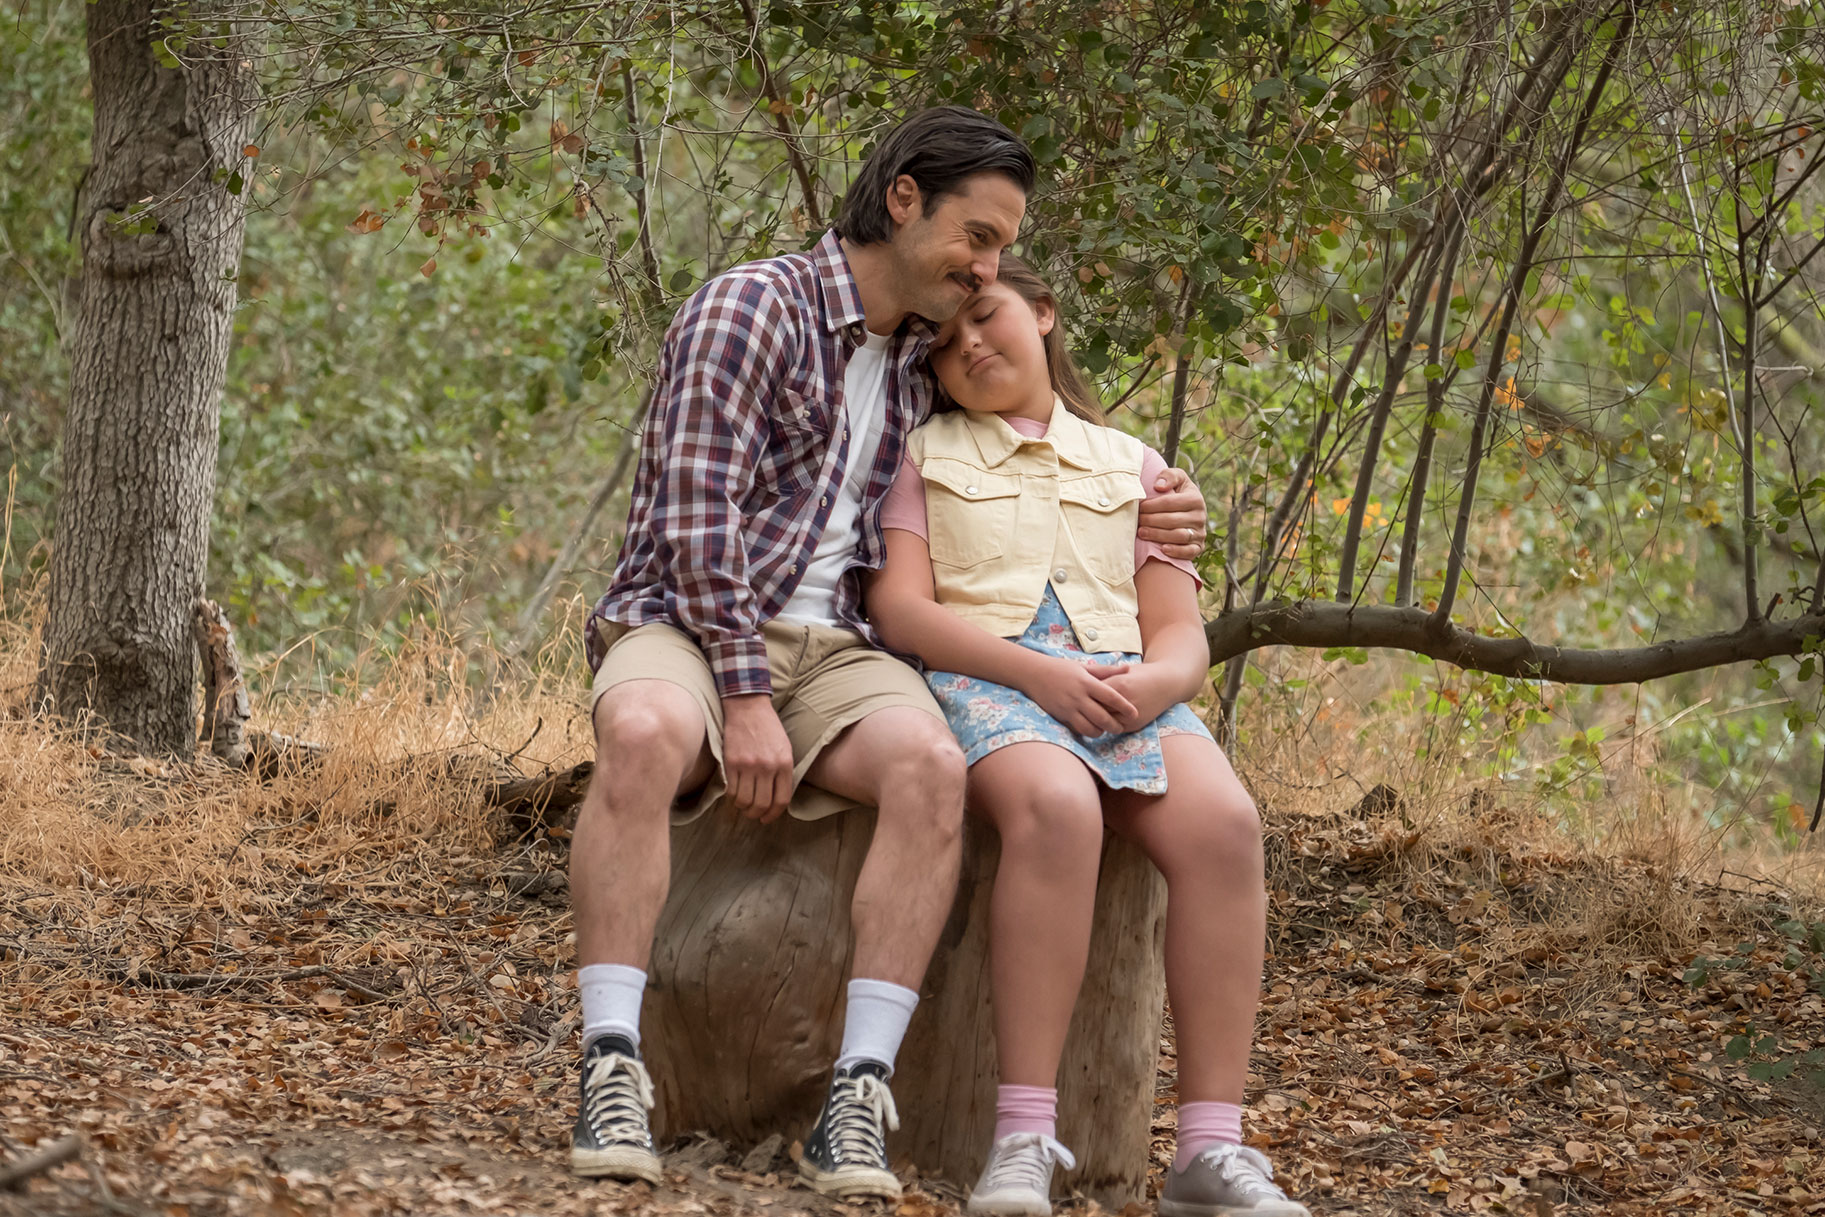 Jack and young kate embrace while sitting on a tree stump in the woods